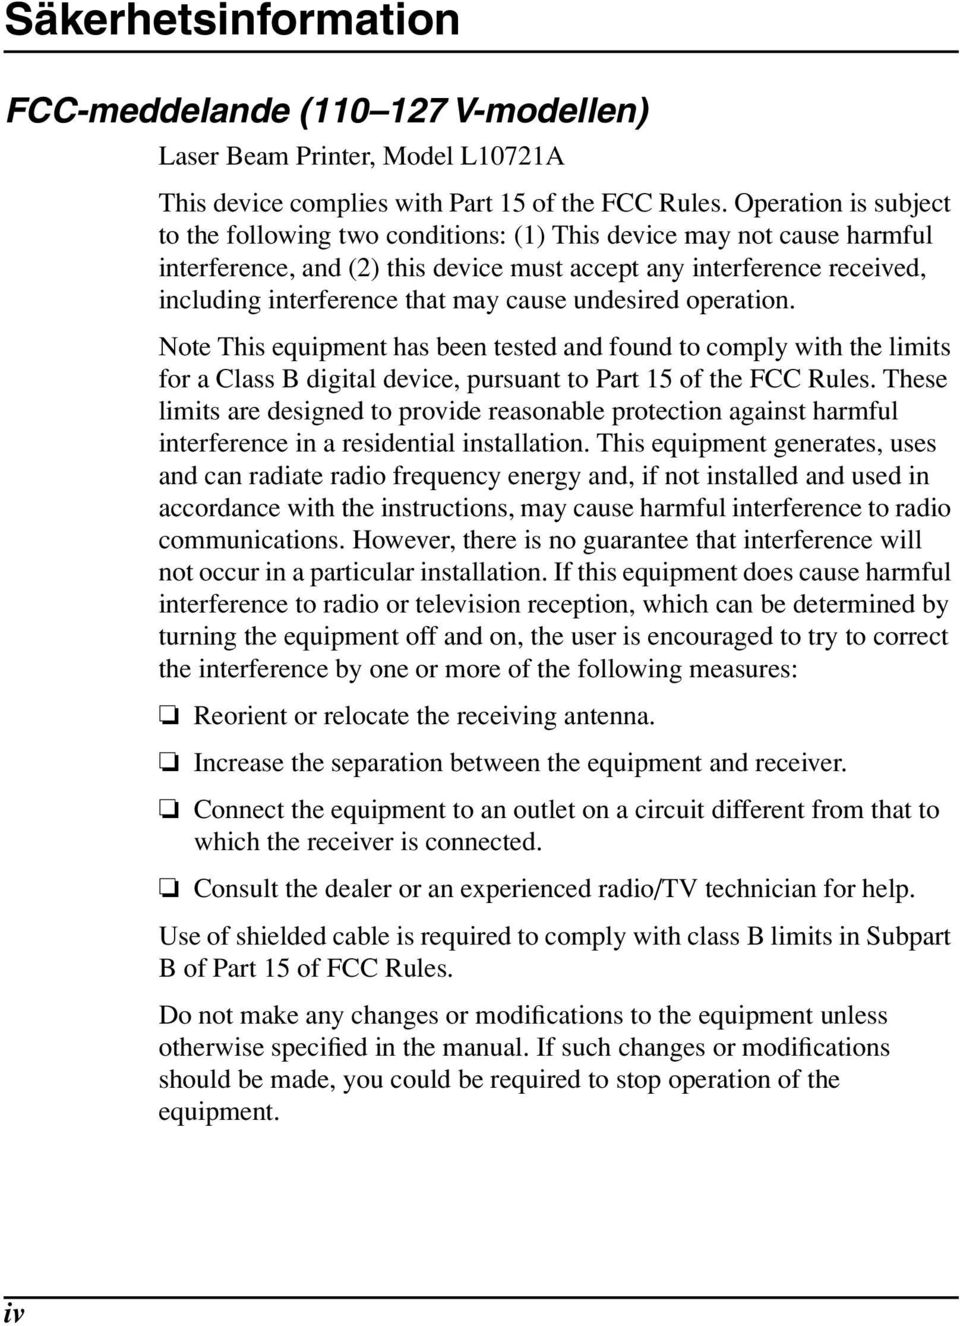 cause undesired operation. Note This equipment has been tested and found to comply with the limits for a Class B digital device, pursuant to Part 15 of the FCC Rules.